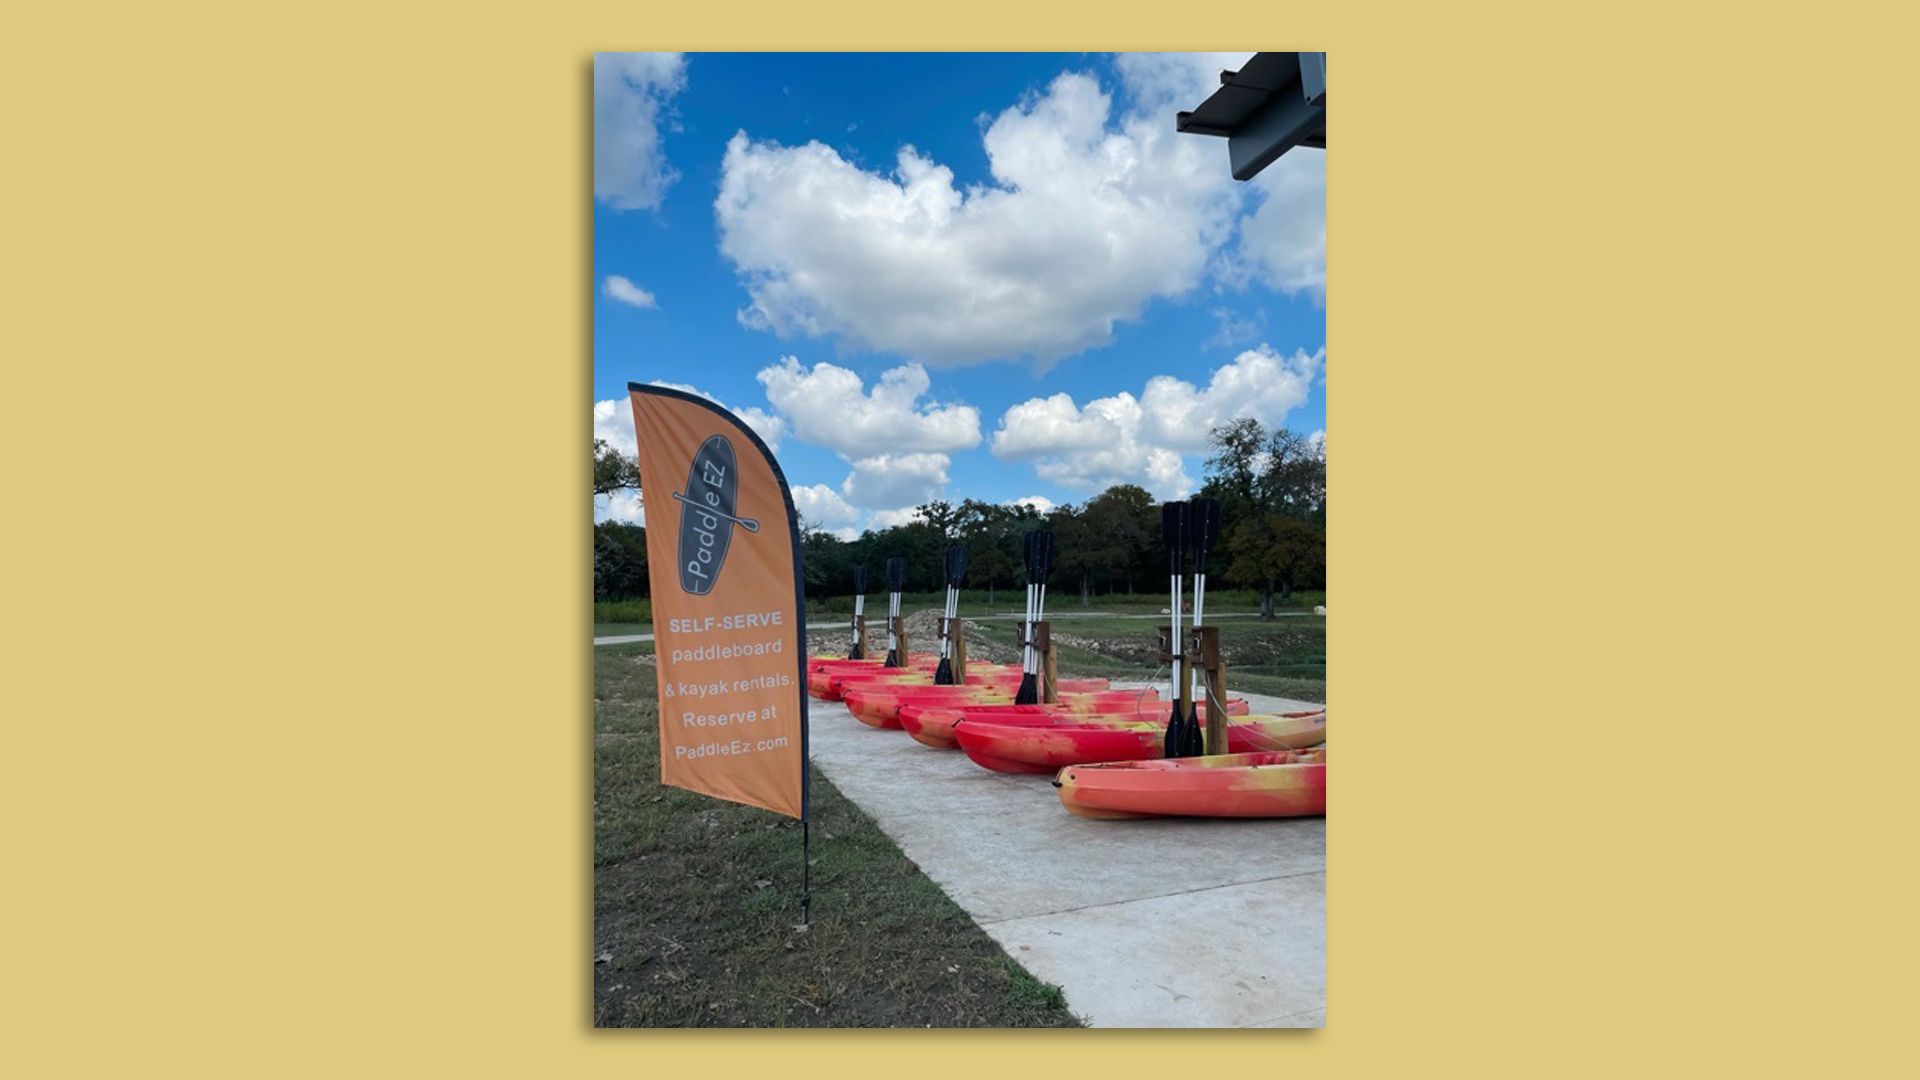 Image an automatic kayak rental stand in Texas. 